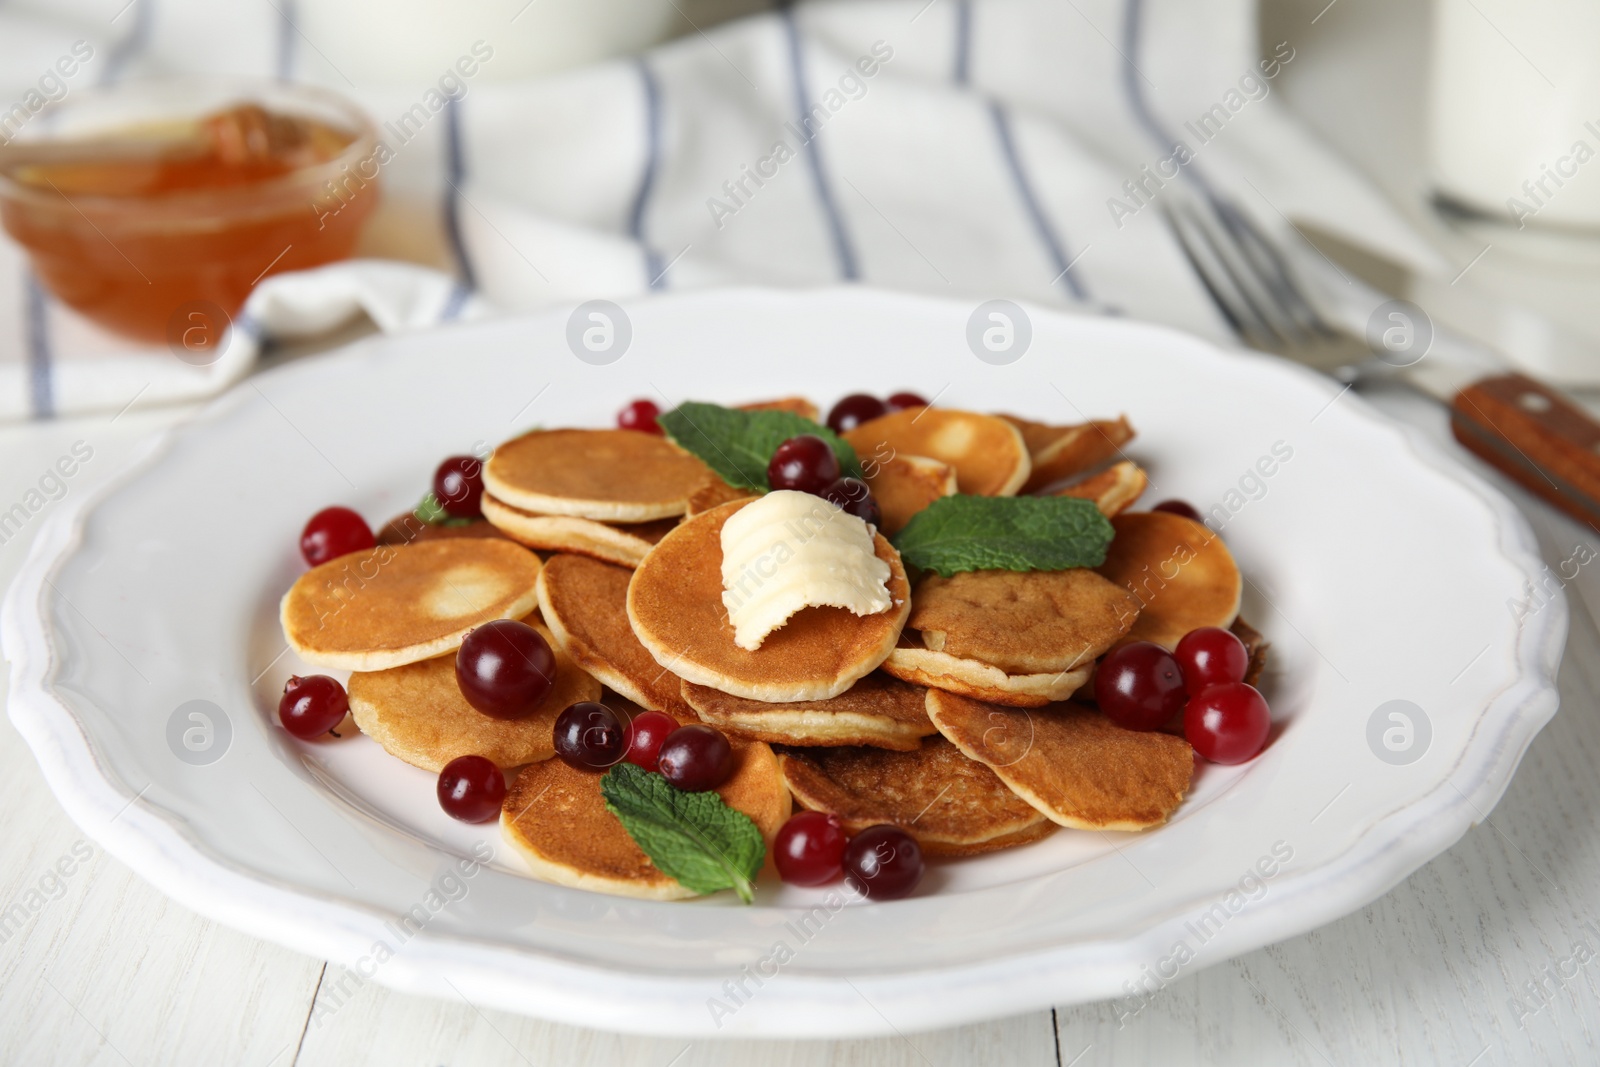 Photo of Cereal pancakes with cranberries and butter on white wooden table